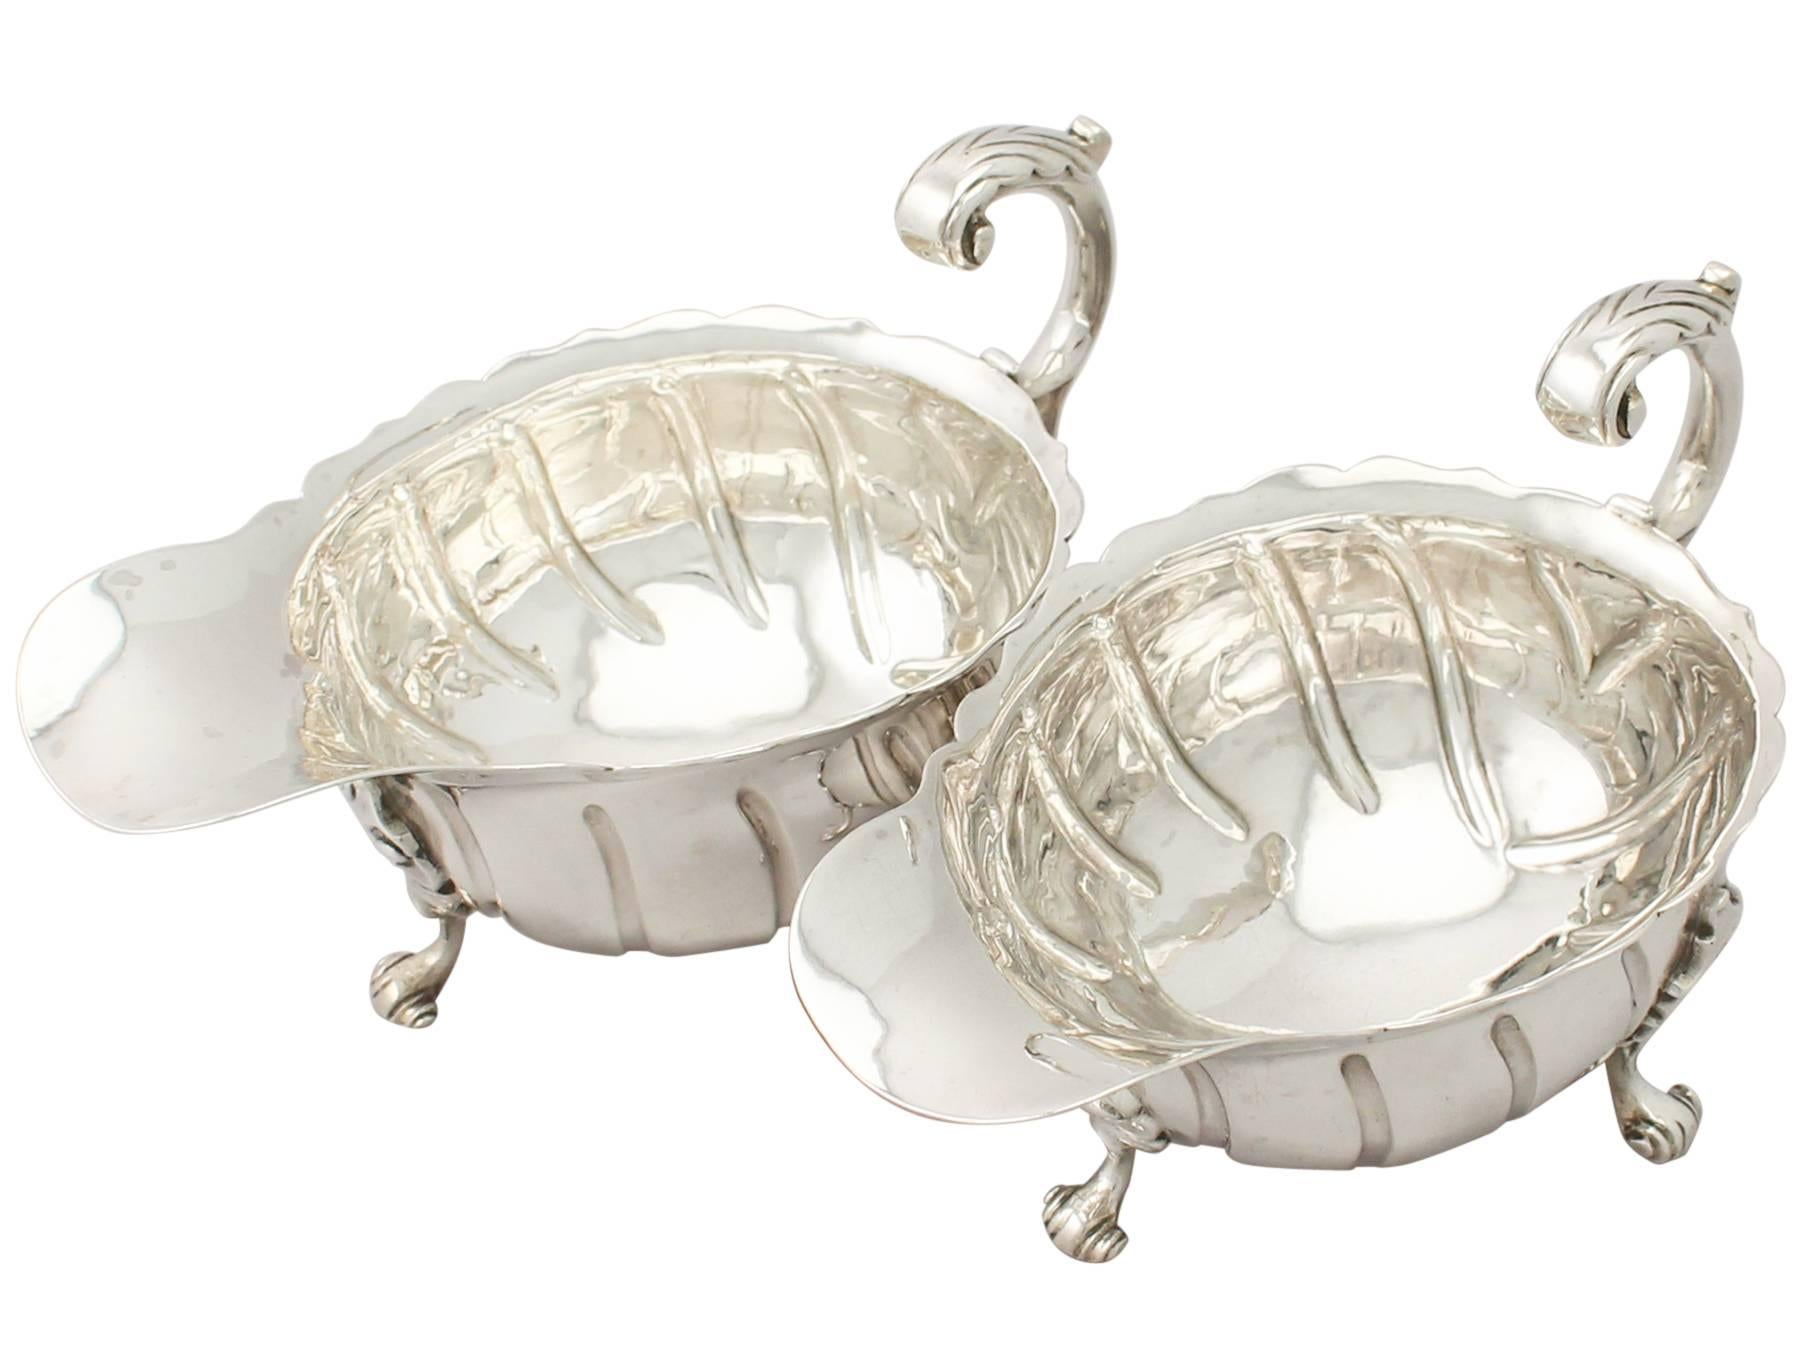 A fine and impressive pair of antique Victorian English sterling silver sauceboats; an addition to our dining silverware collection.

These fine antique Victorian sterling silver sauceboats have an oval rounded form.

The surface of each silver